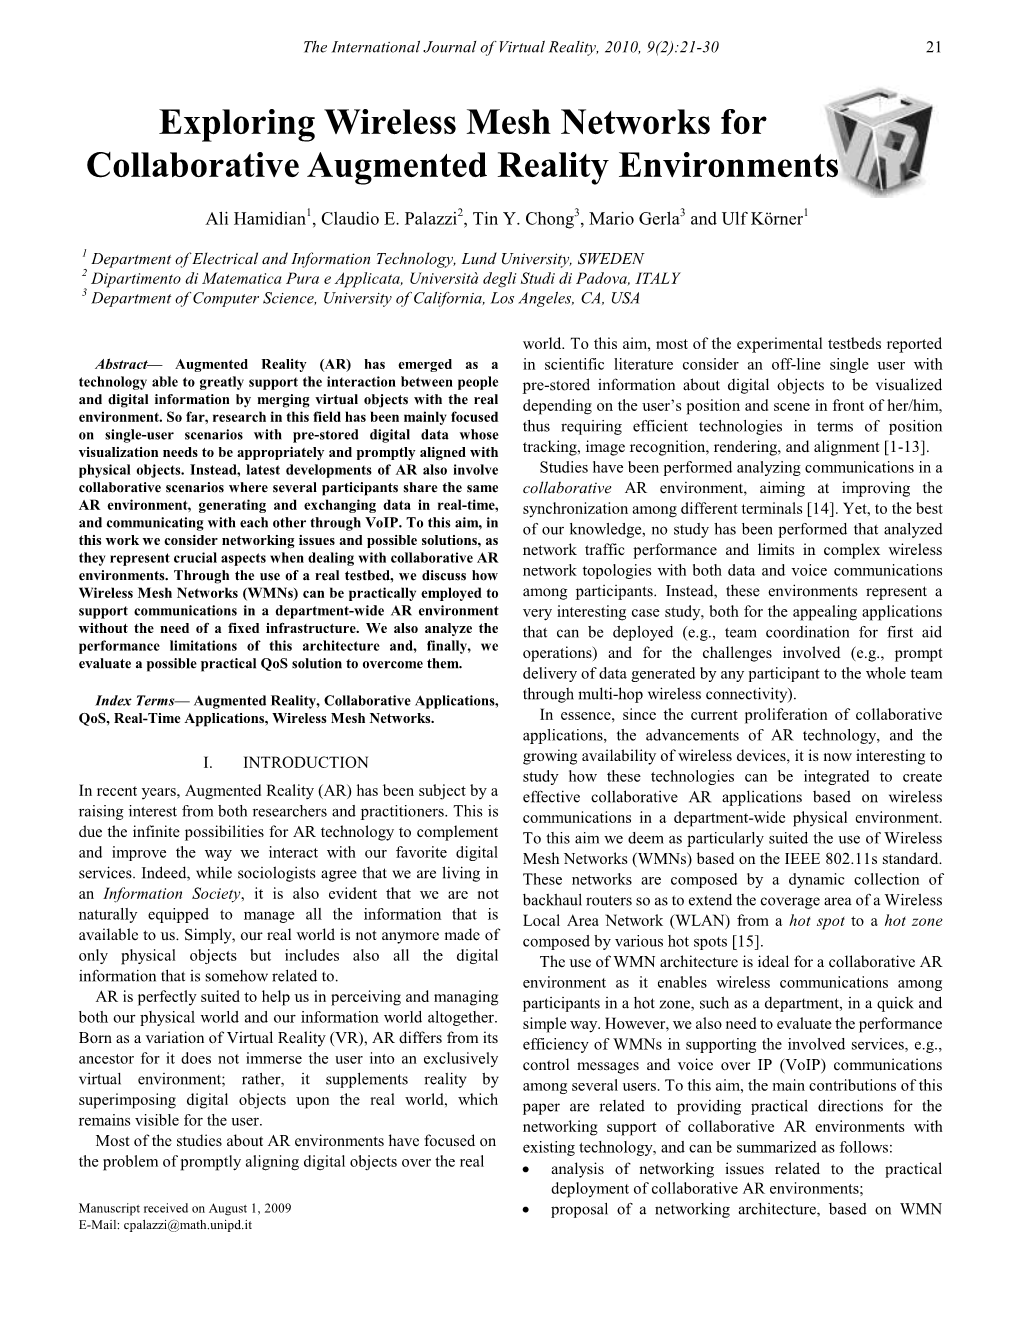 Exploring Wireless Mesh Networks for Collaborative Augmented Reality Environments